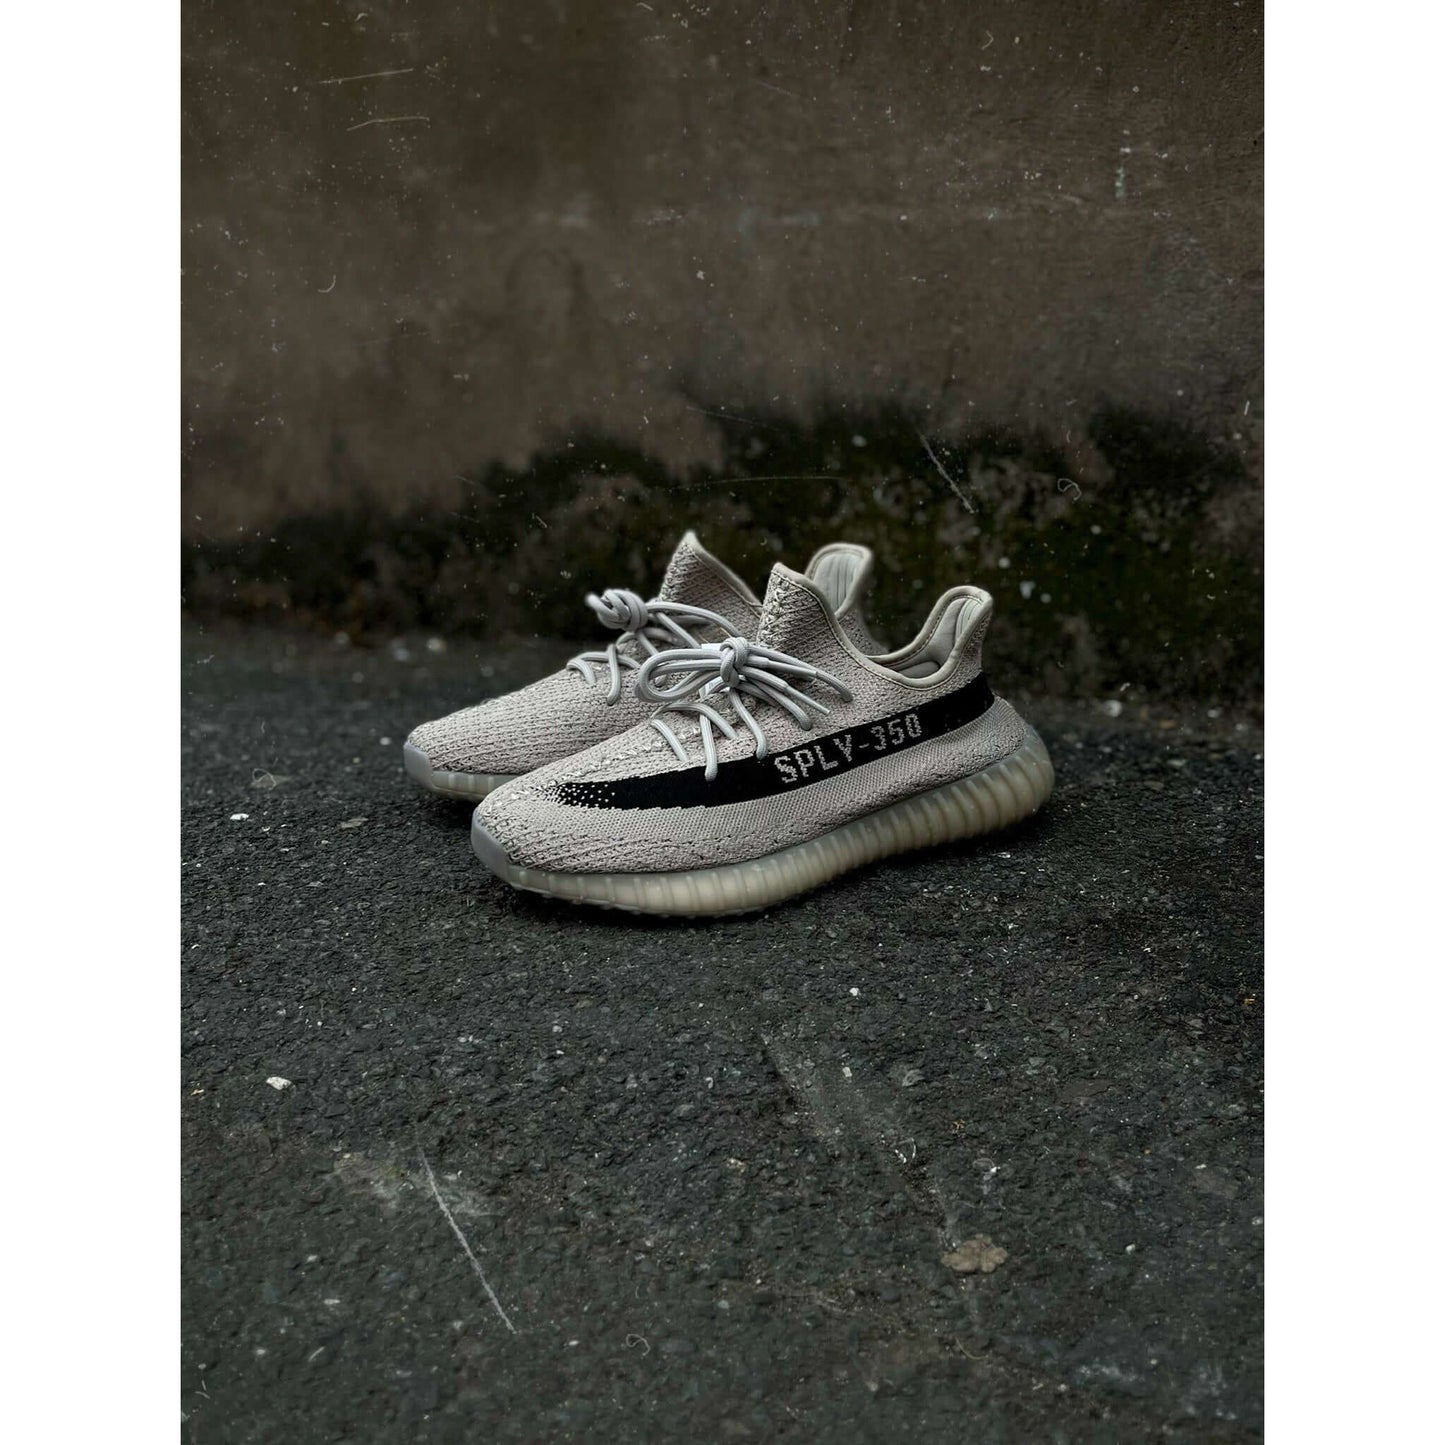 Adidas Yeezy Boost 350 V2 Slate by Yeezy from £250.00